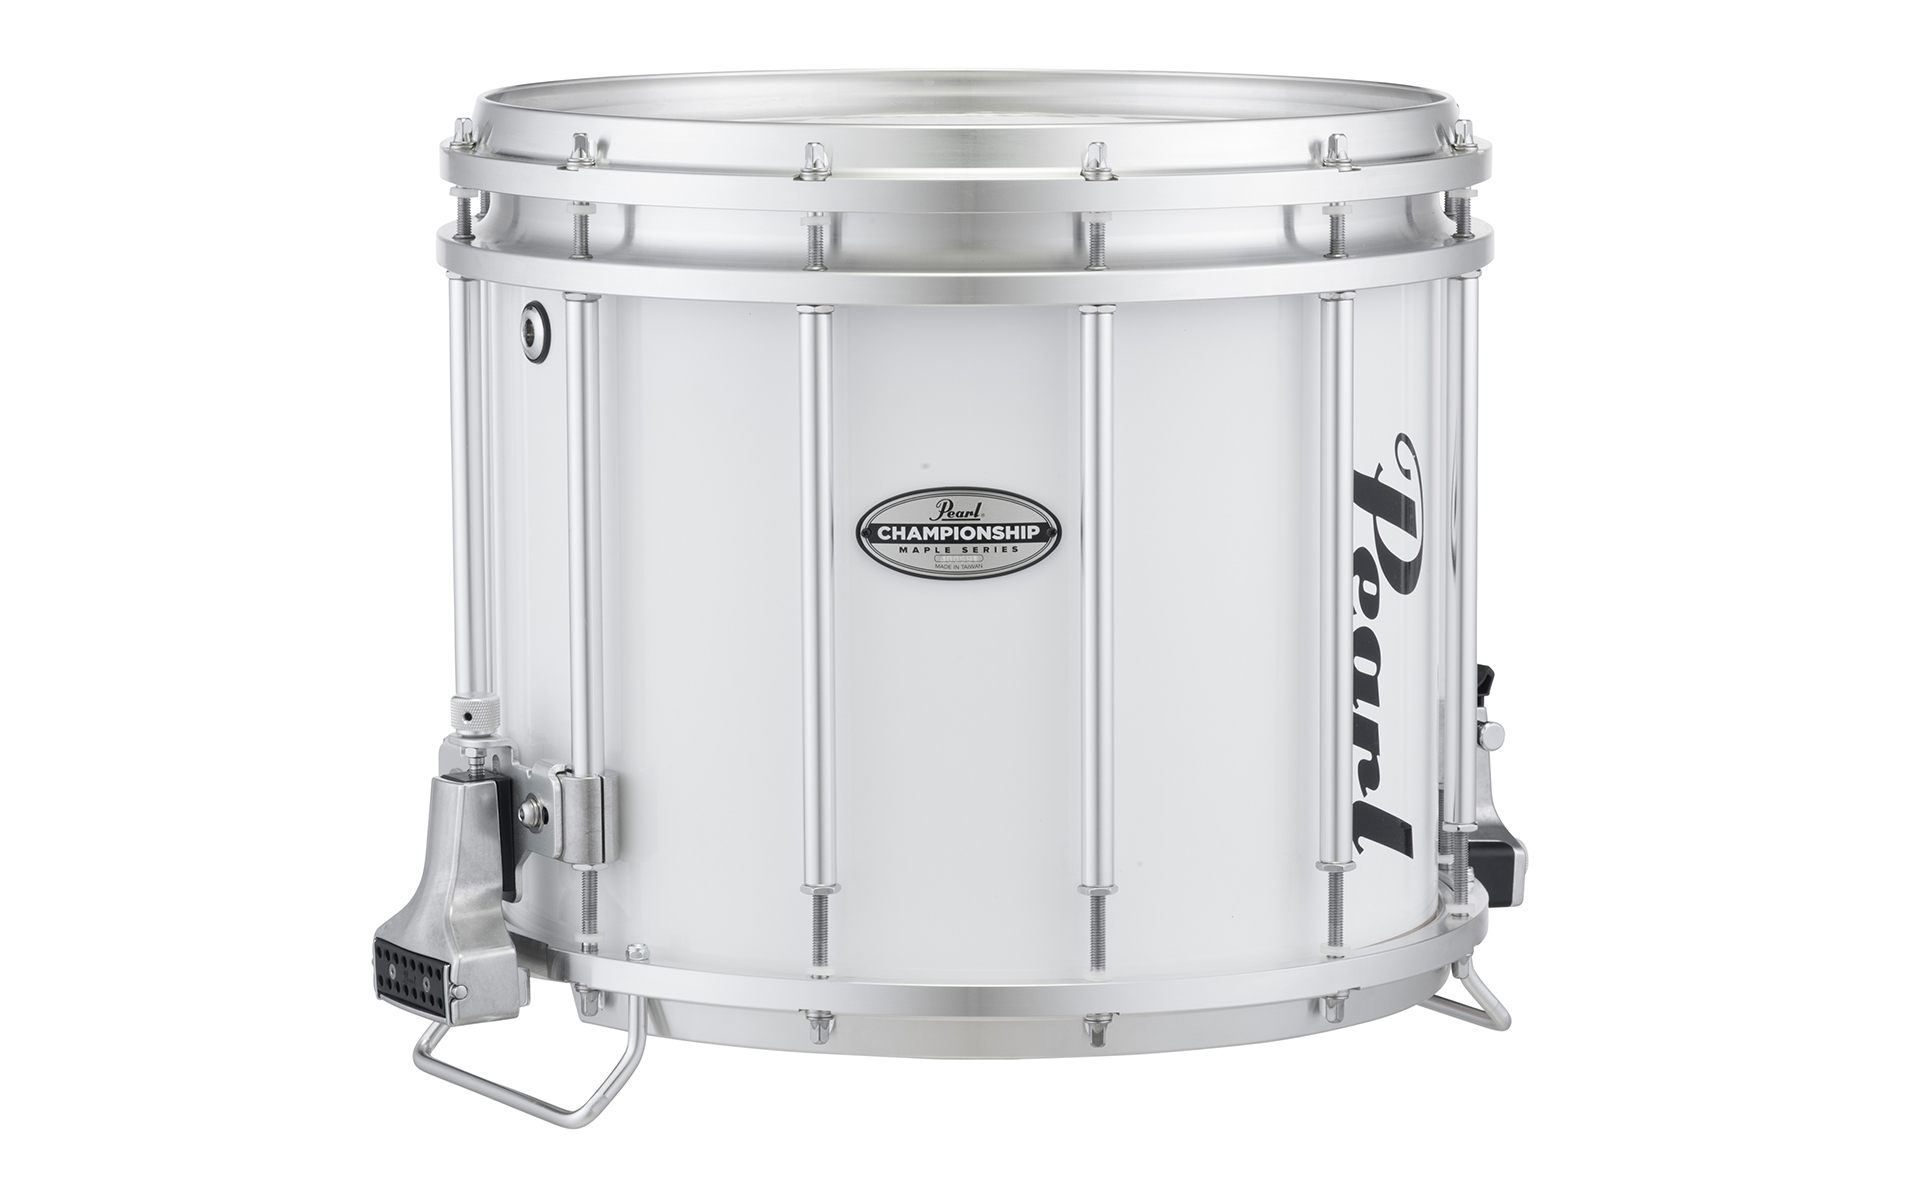 FFXM Championship Maple Snare Drums